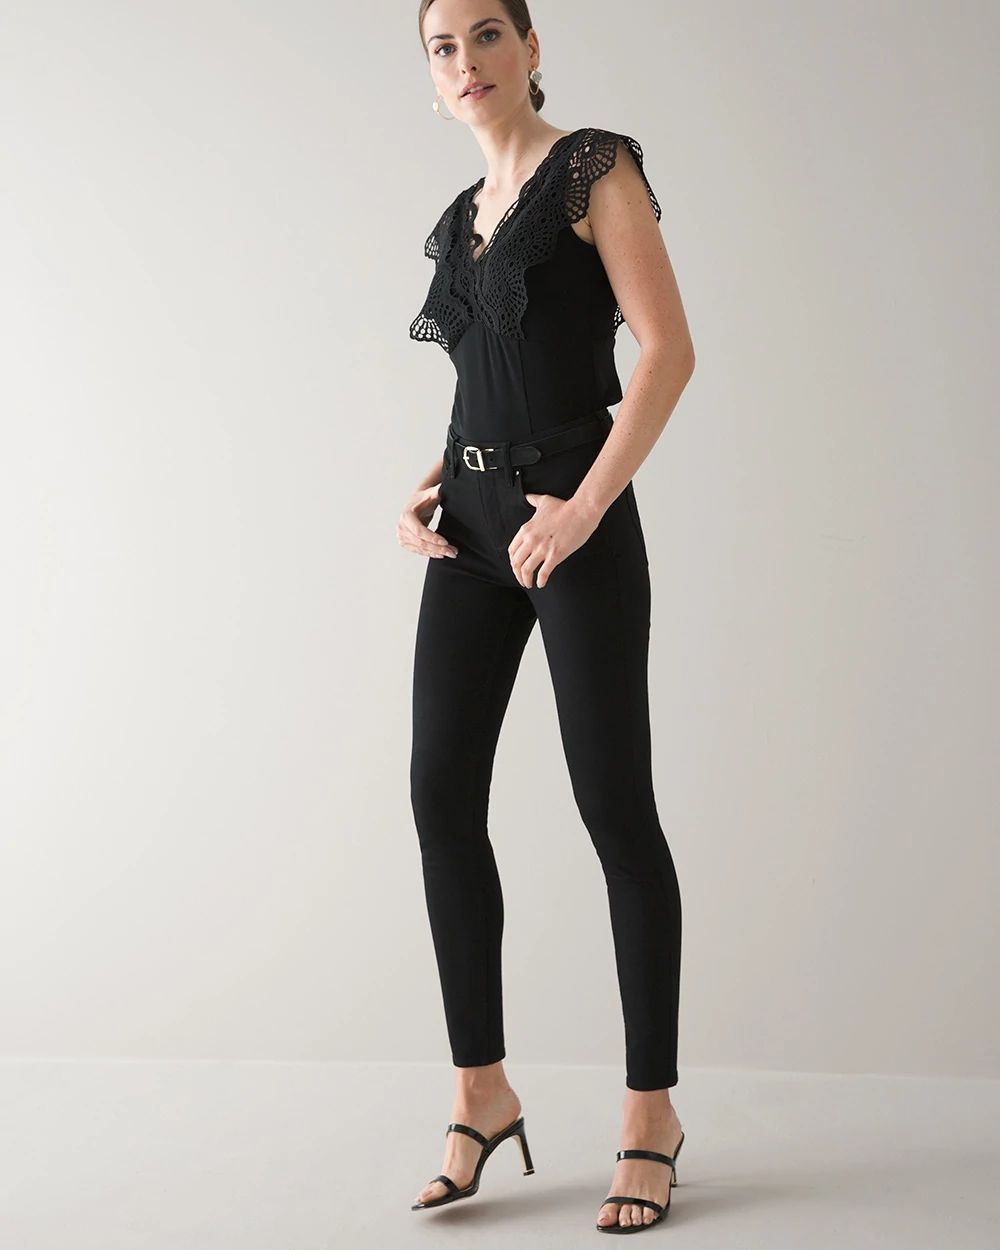 Petite High-Rise Sculpt Skinny Jeans click to view larger image.